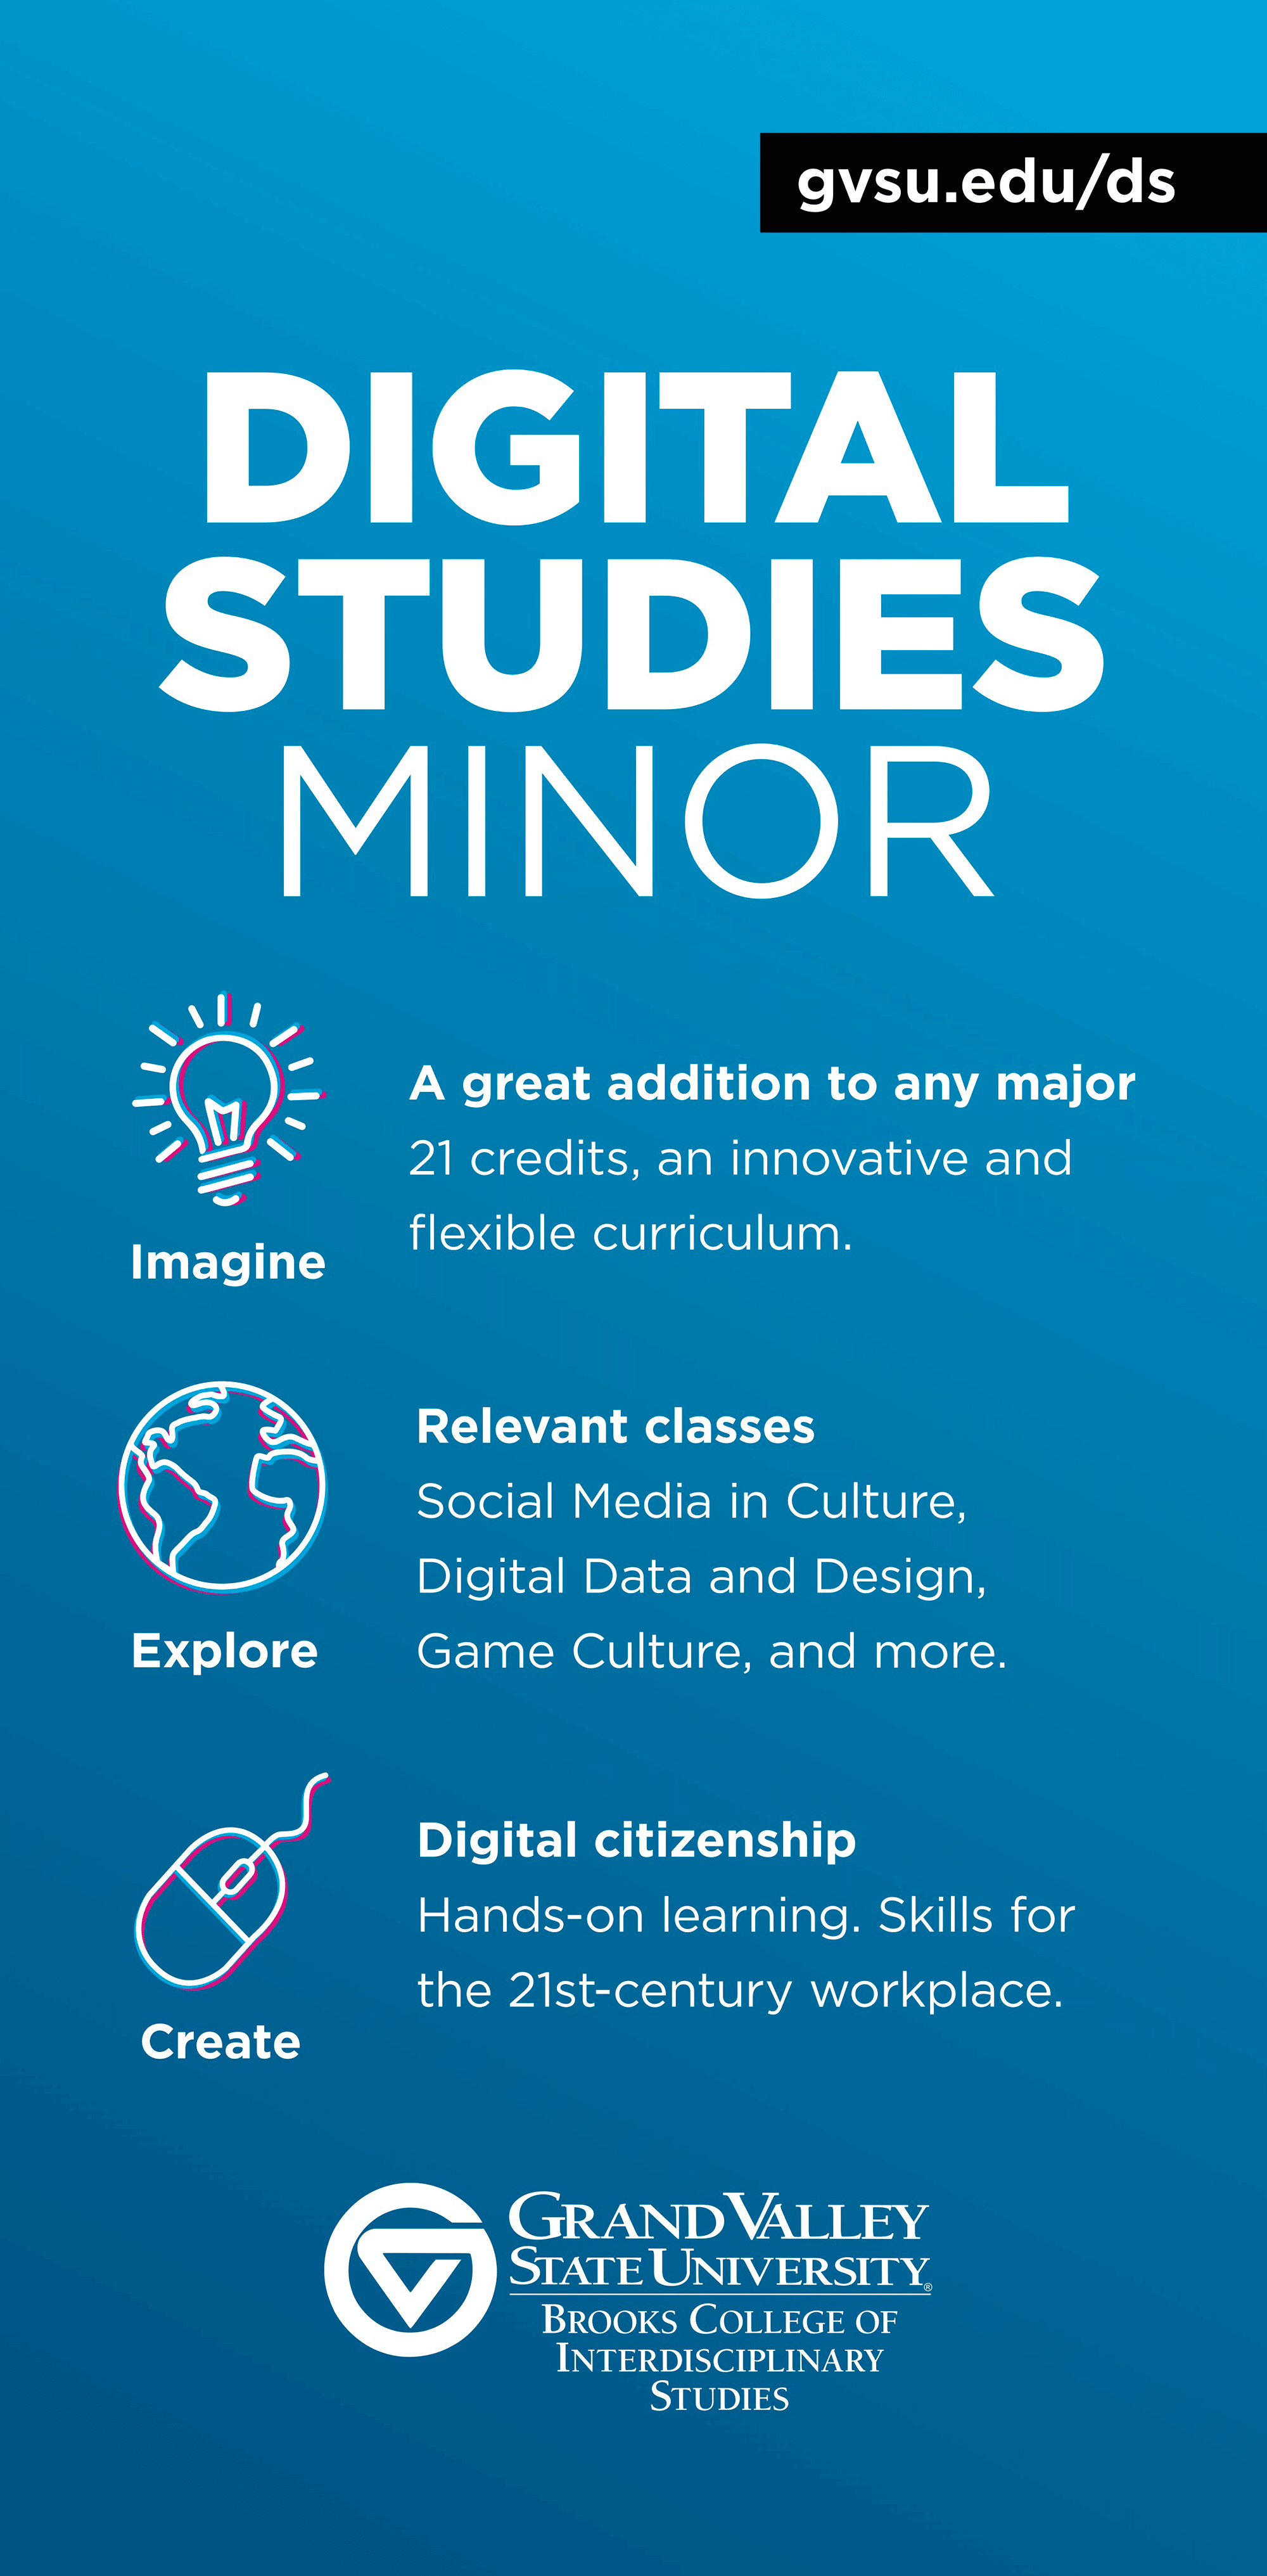 Figure 3. This image presents a promotional banner that advertises the Digital Studies Minor at Grand Valley State University, including icons for key elements Imagine, Explore, Create.